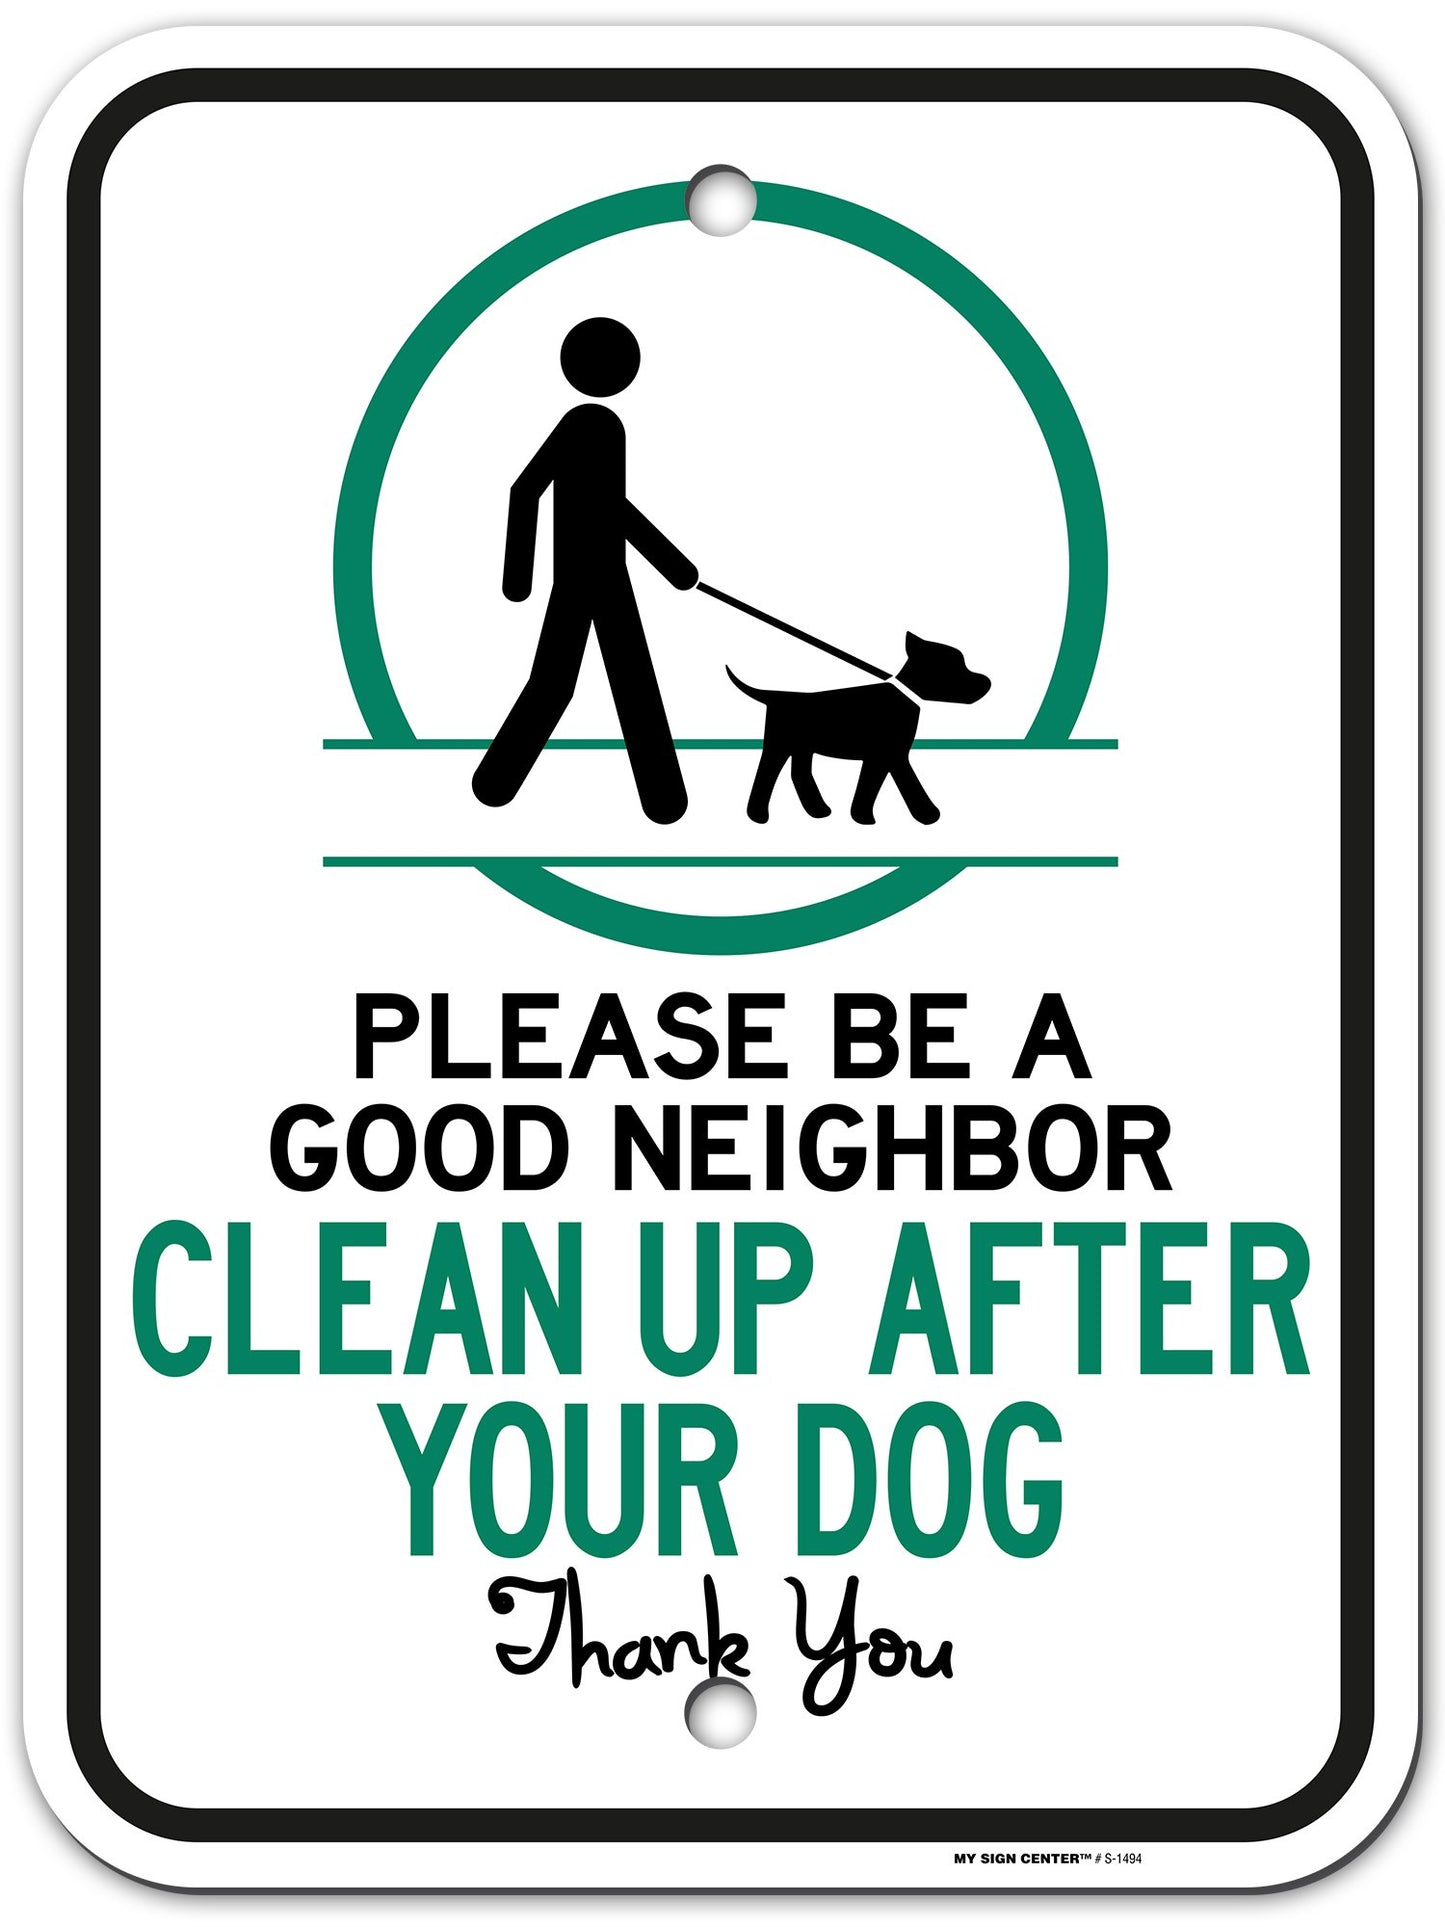 Please Be a Good Neighbor Clean Up After Your Dog Sign